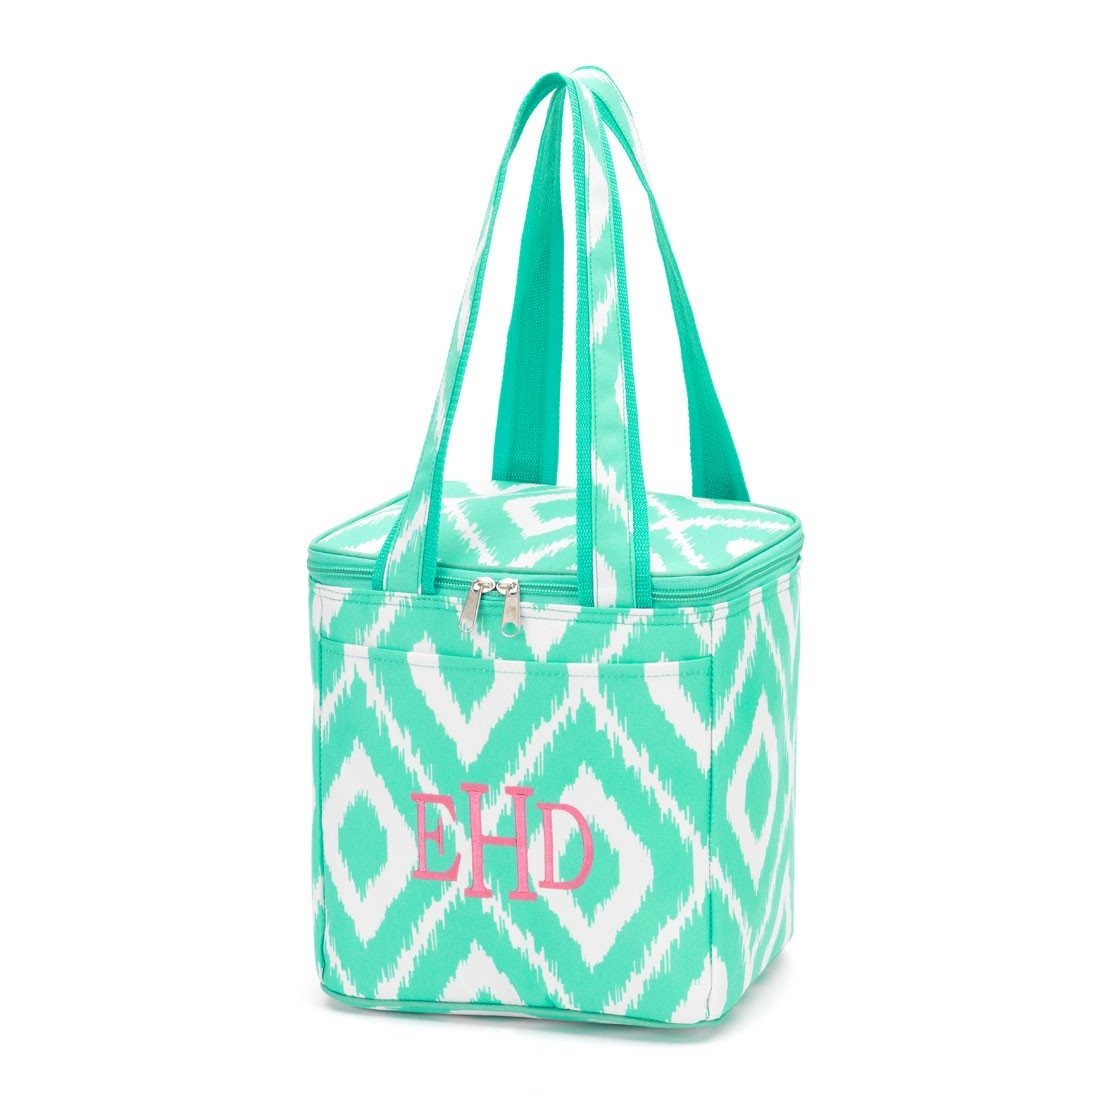 Cooler Tote Embroidery Blanks - MINT IKAT - CLOSEOUT